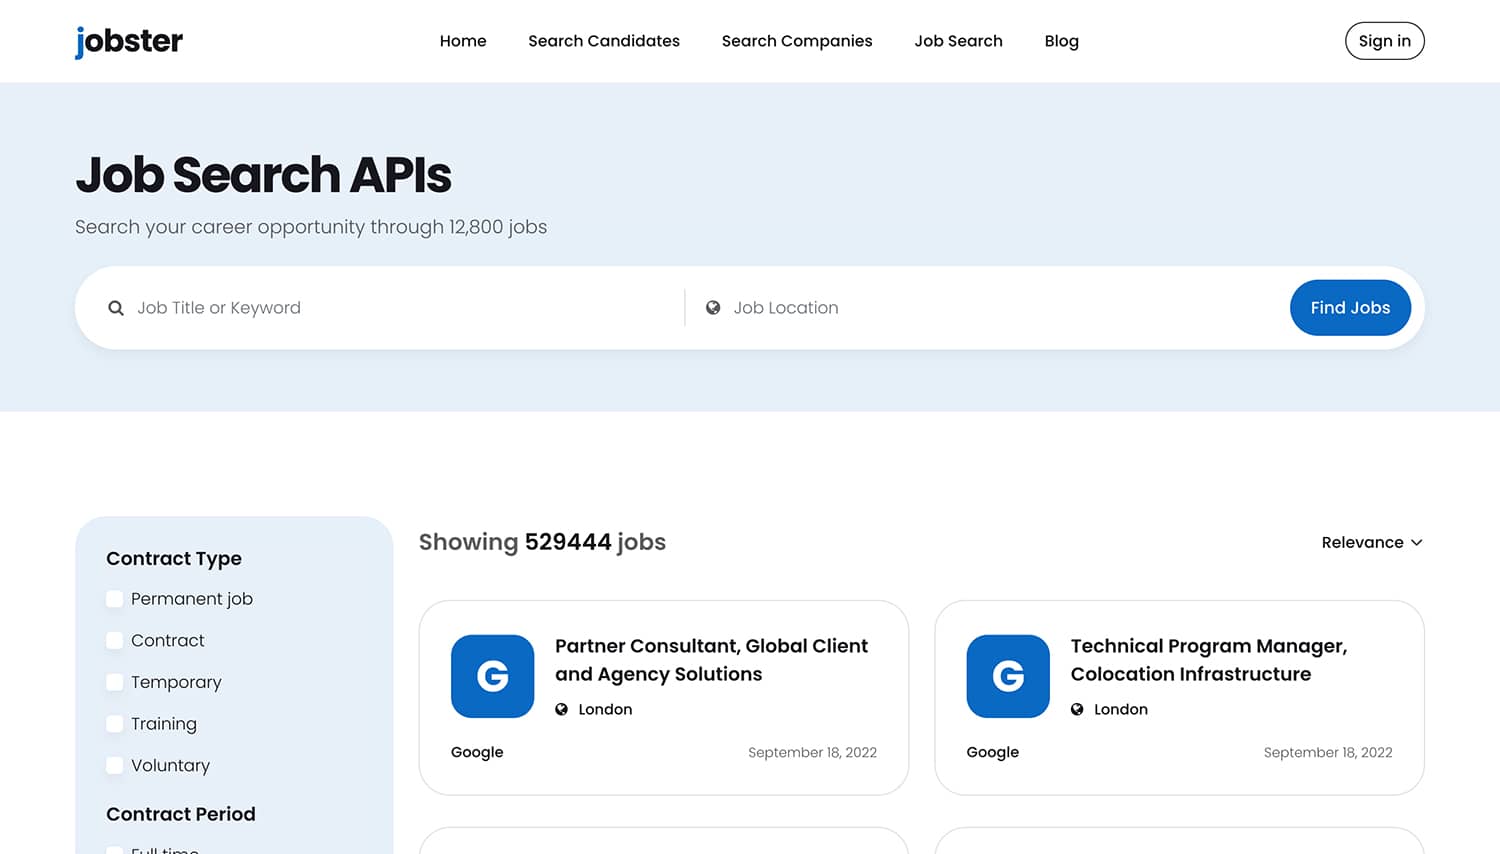 Jobster job search external APIs page front-end